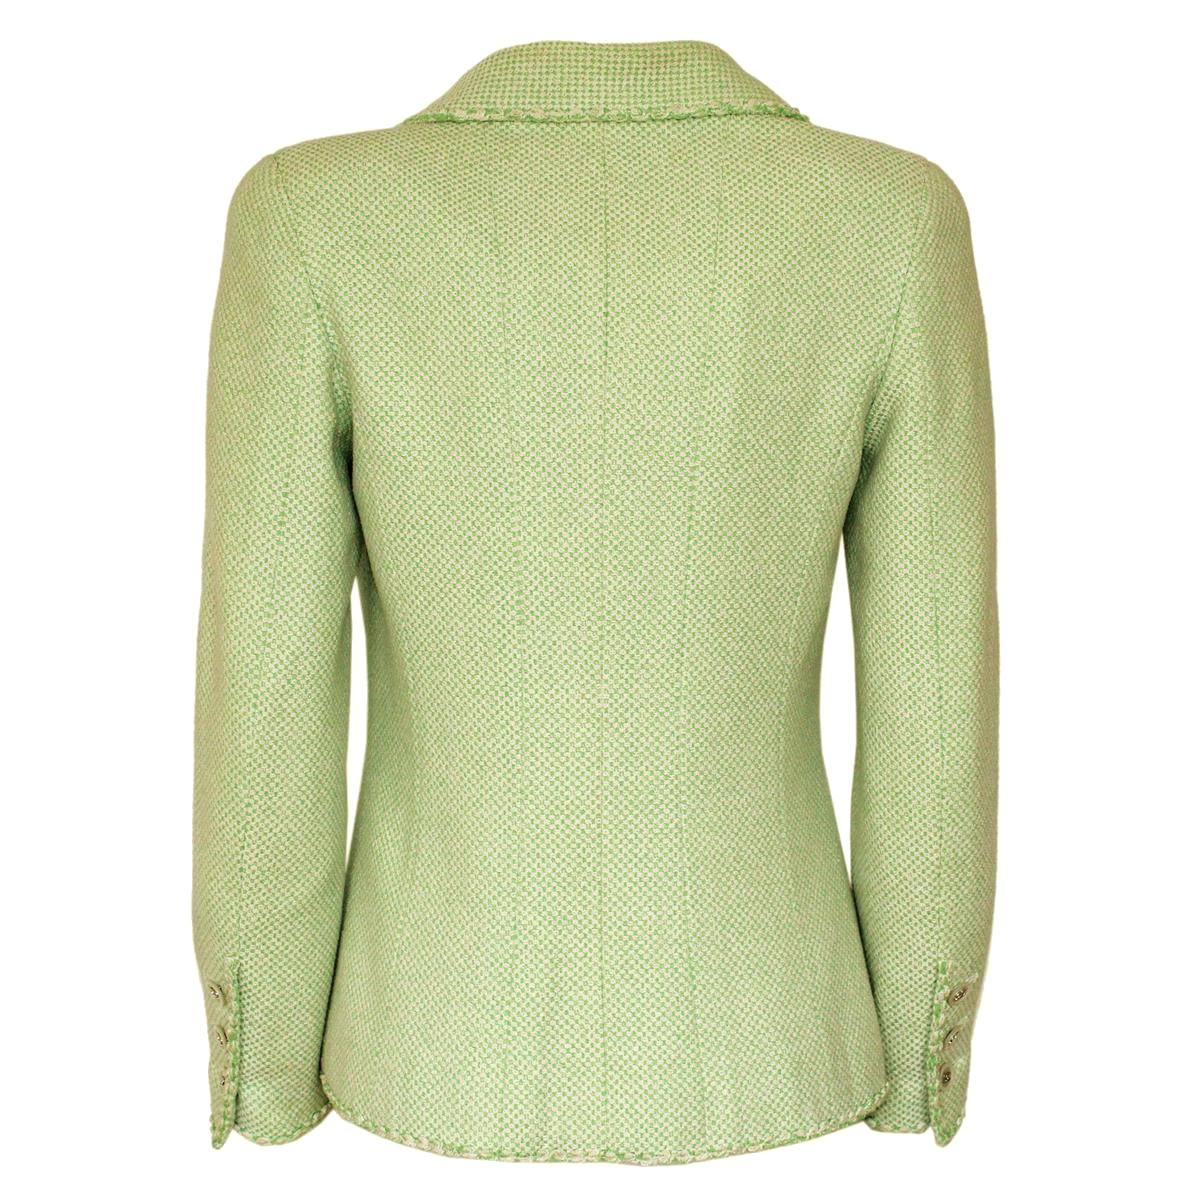 Beautiful Chanel Jacket
Wool (40%) and nylon 
Green pattern
Two pockets
Three buttons
Length from shoulder cm 58 (22.8 inches)
Size 38 french, 42 italian
Made in France
Worldwide express shipping included in the price !